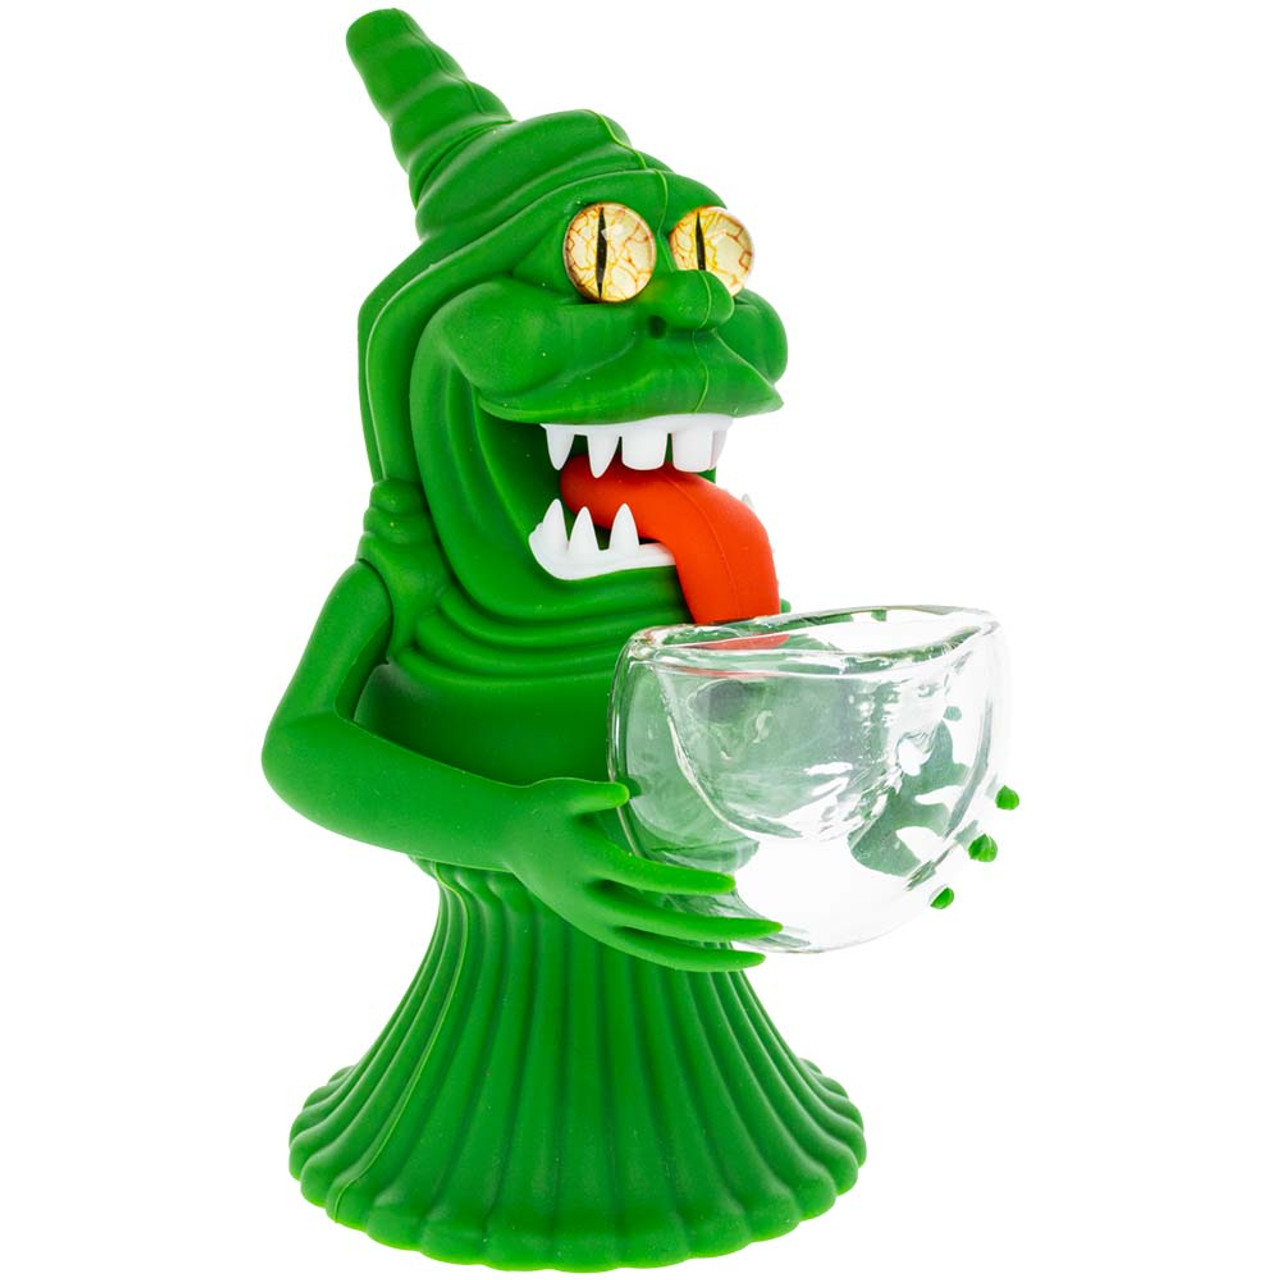 https://cdn11.bigcommerce.com/s-1n8r405nxd/images/stencil/1280x1280/products/11415/24860/85806-2-Silicone-Ghostbusters-Slimer-Bong-6in-bubbler-quarter__77404.1686847275.jpg?c=2